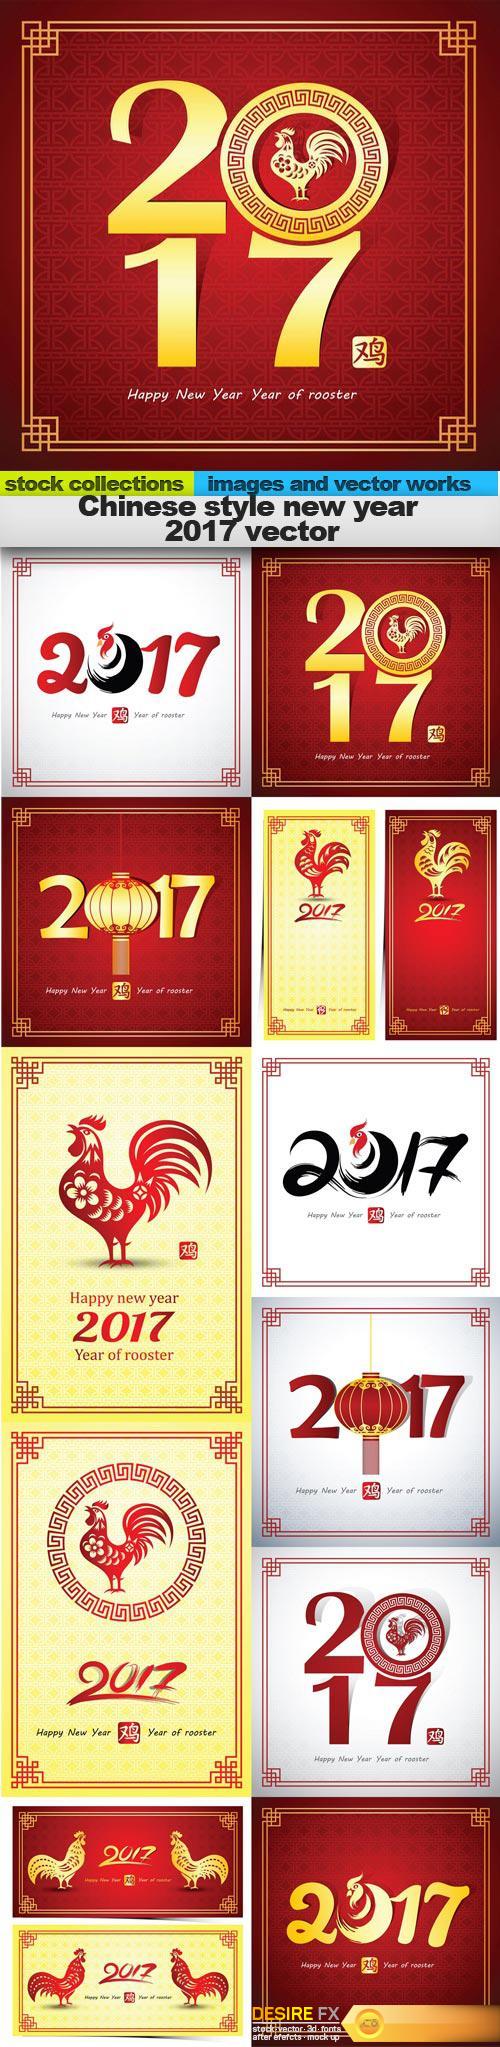 Chinese style new year 2017 vector, 11 x EPS